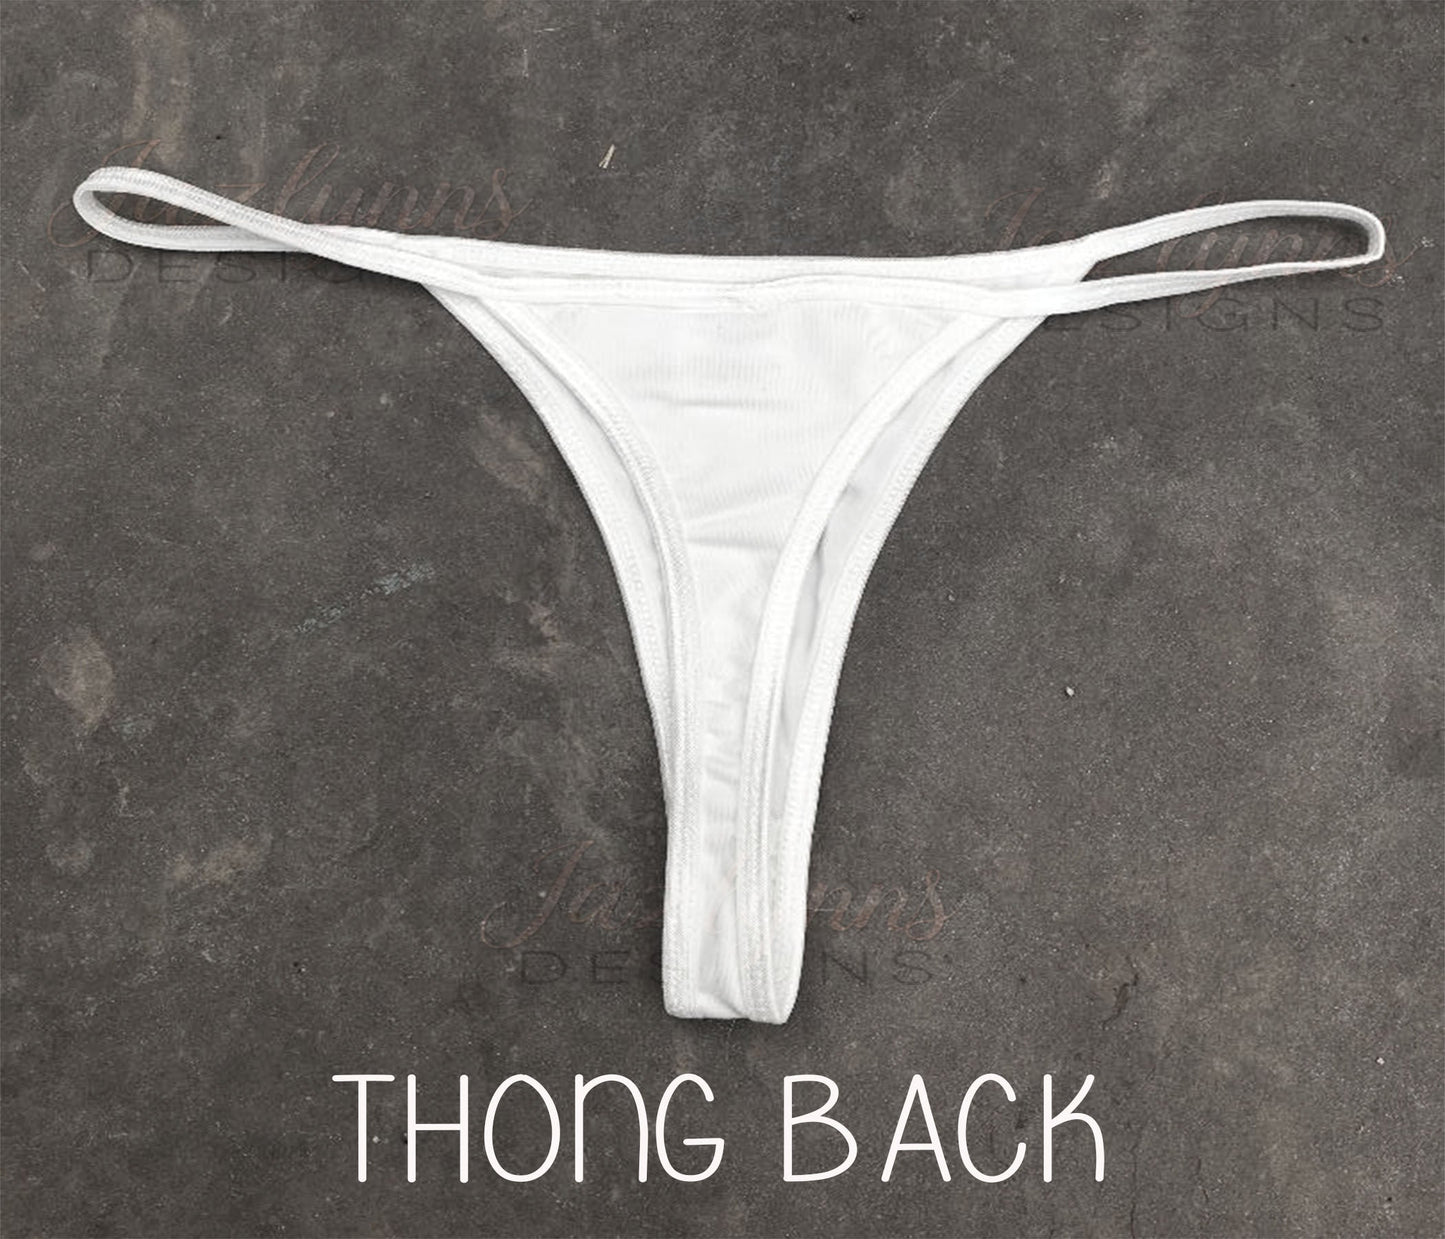 You May Now Fuck The Bride Thong